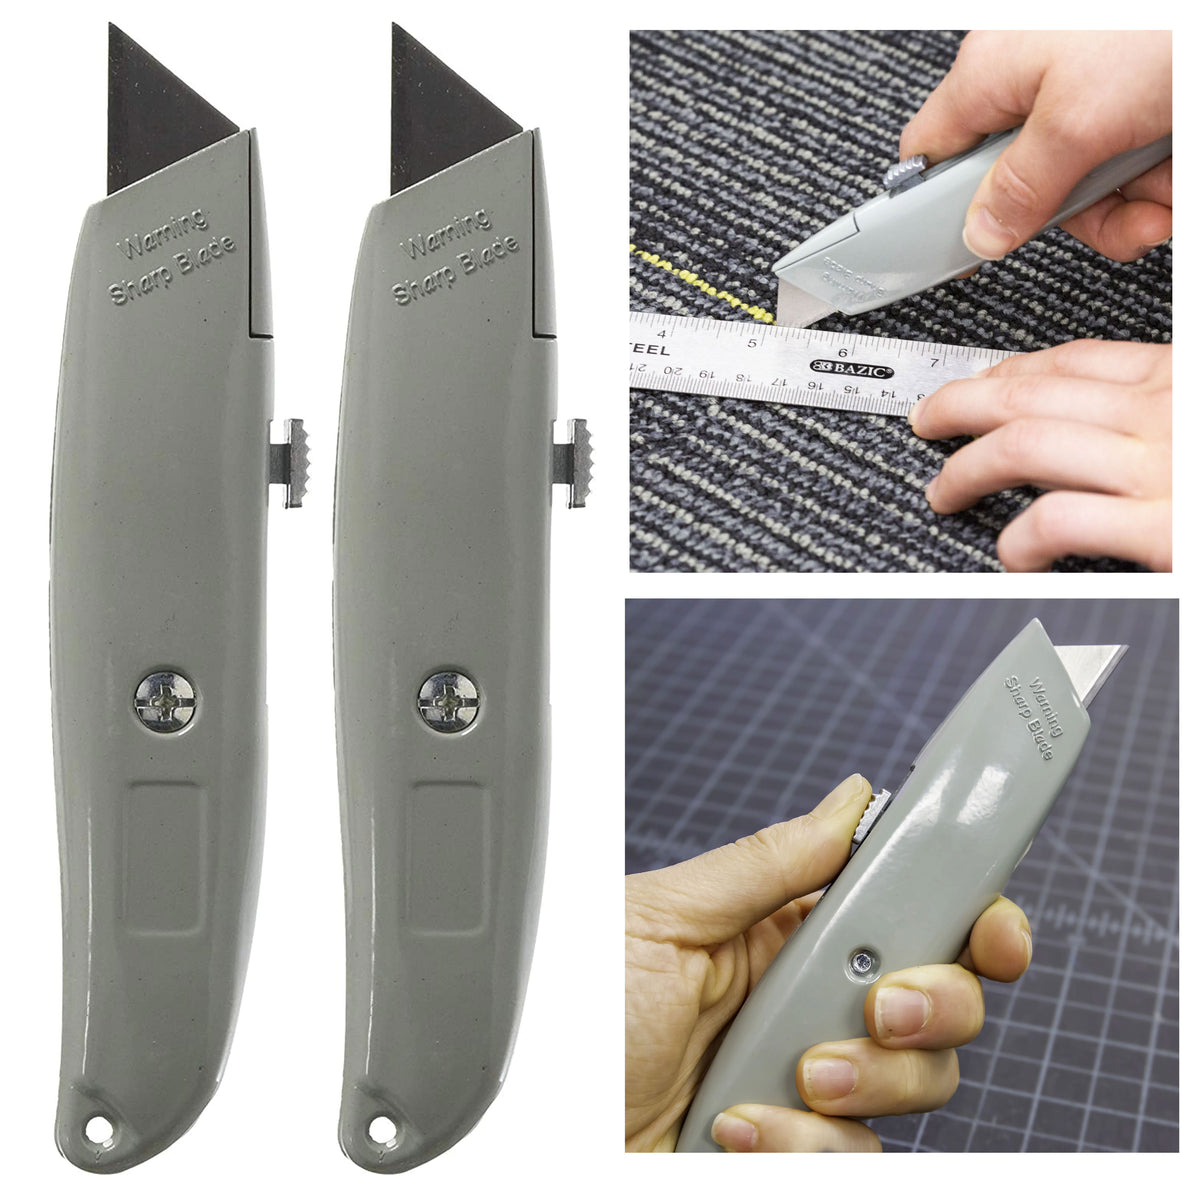 Stainless Steel Utility Knife Art Knive for Cutting Box Paper Cardboard  Retractable Box Knife Perfect for Home, Office